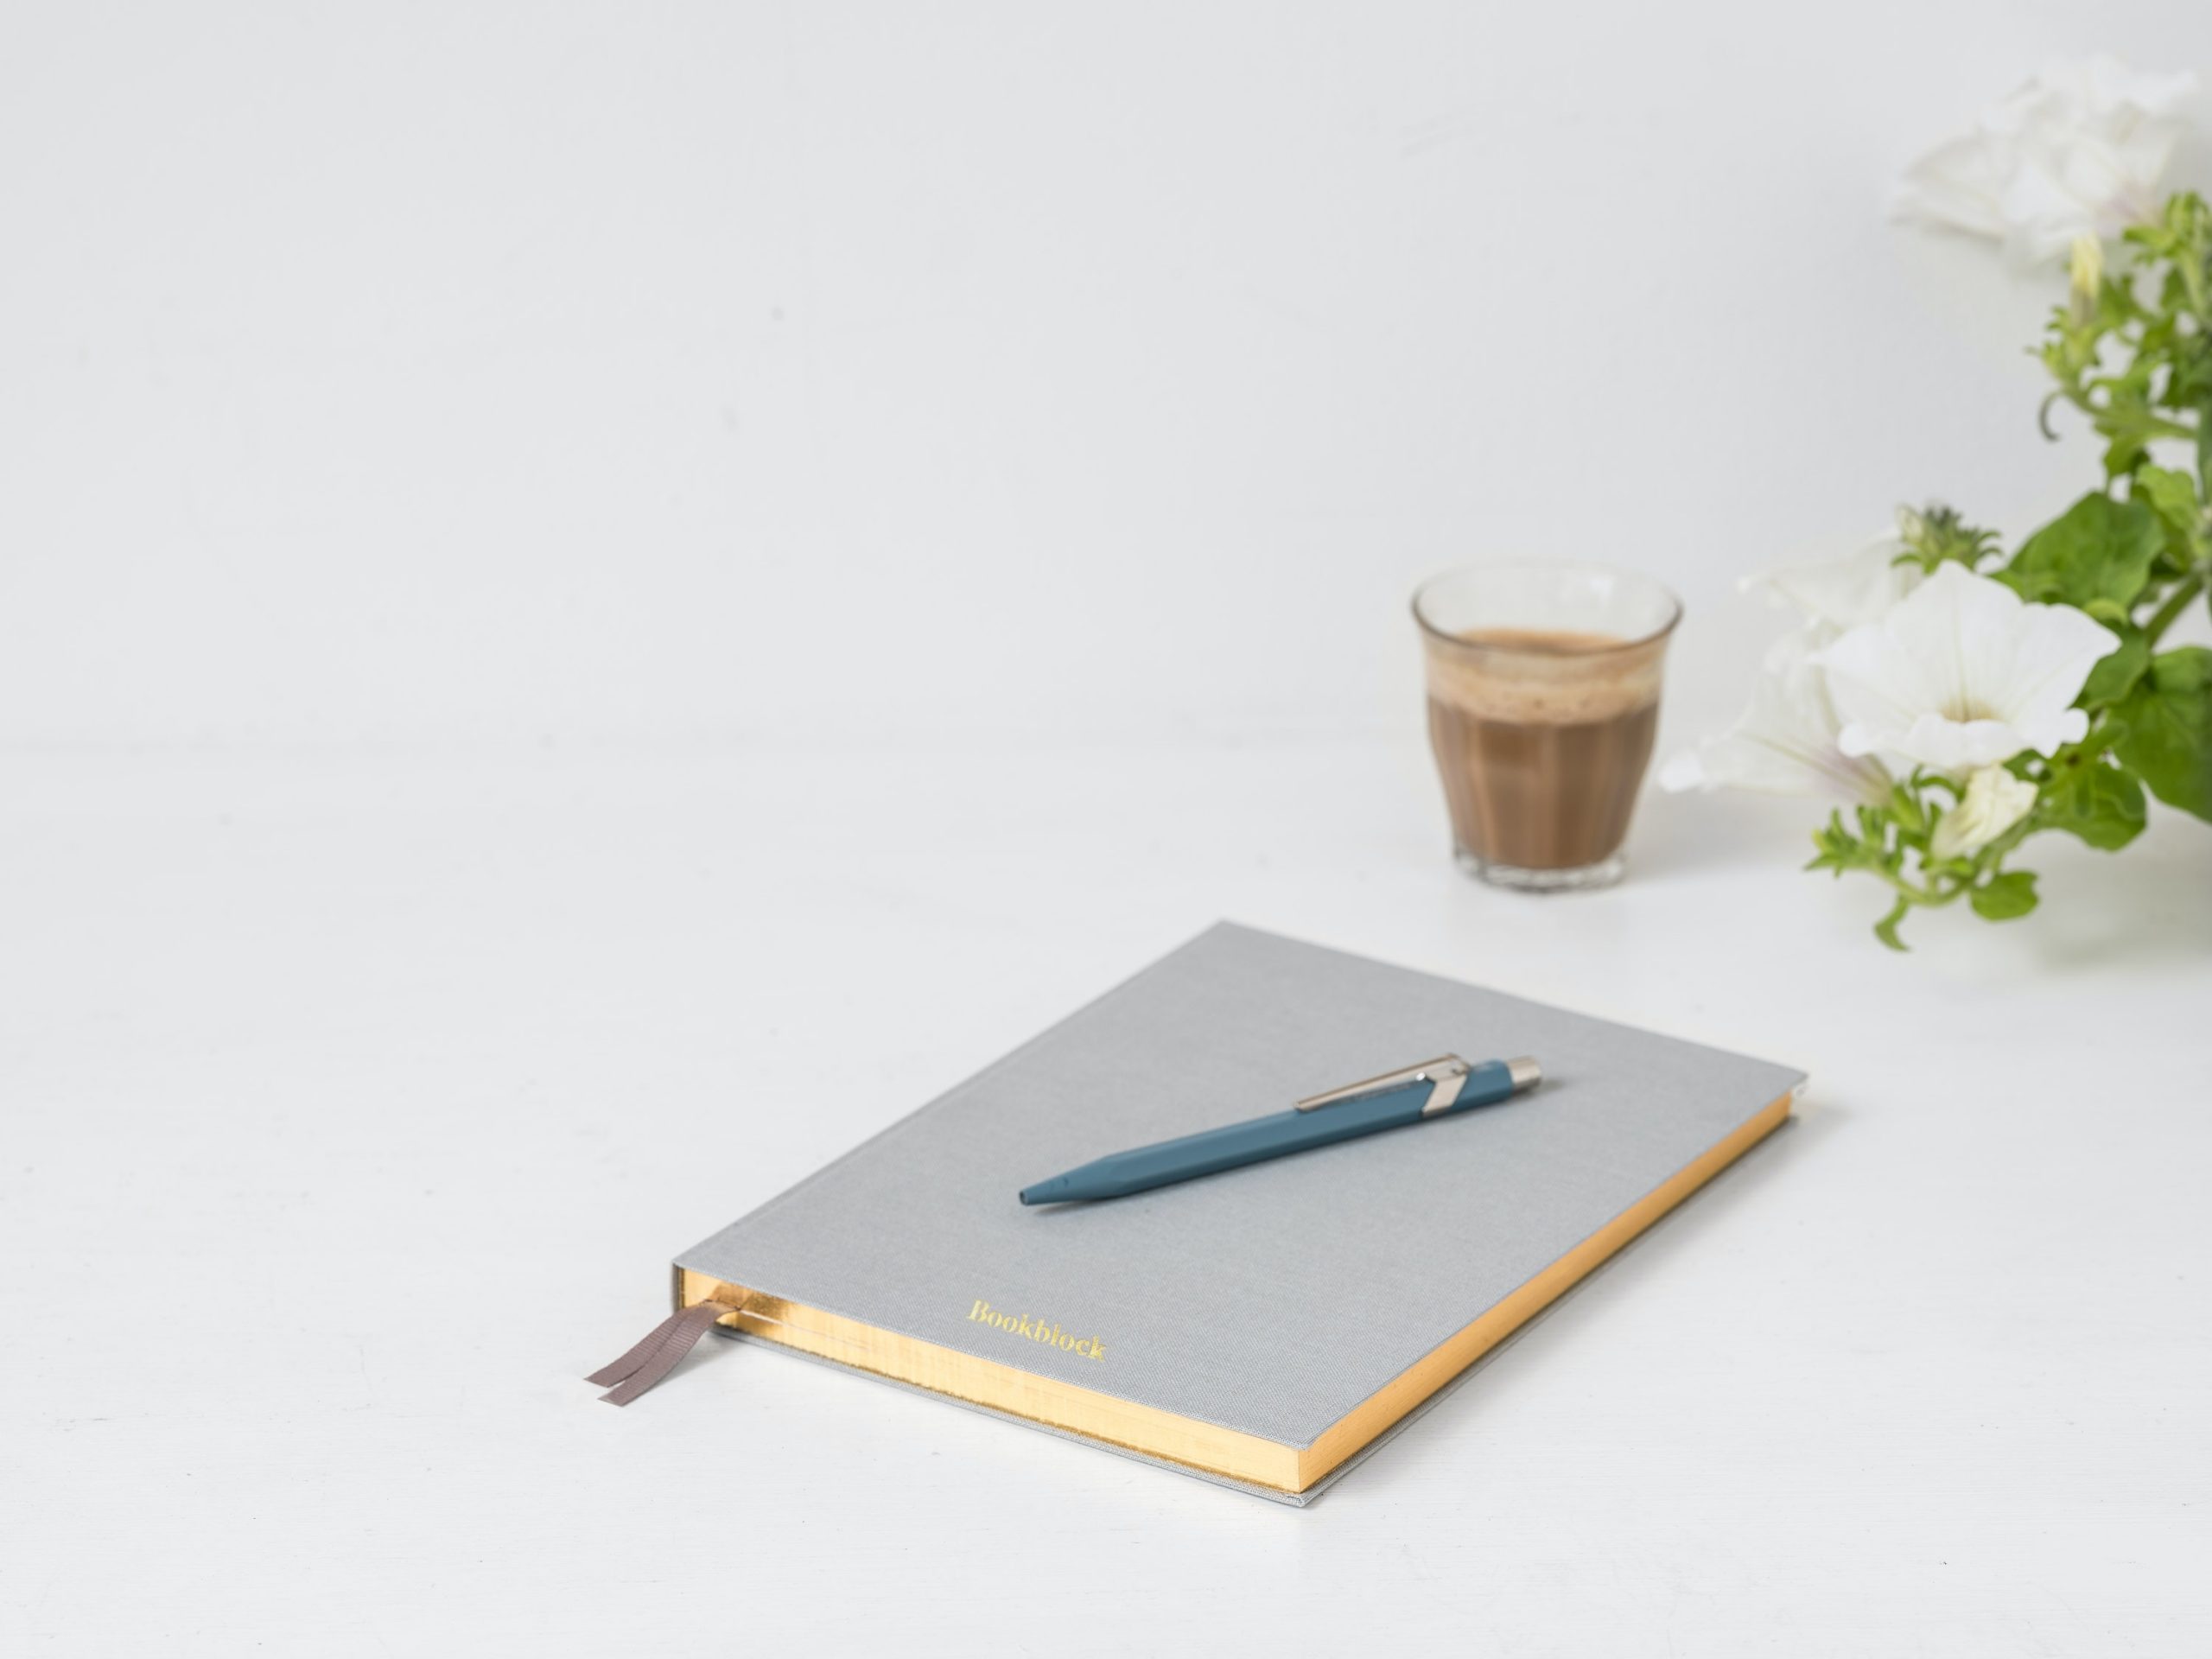 Notebook and pen to represent gratitude journaling and other mental exercises.